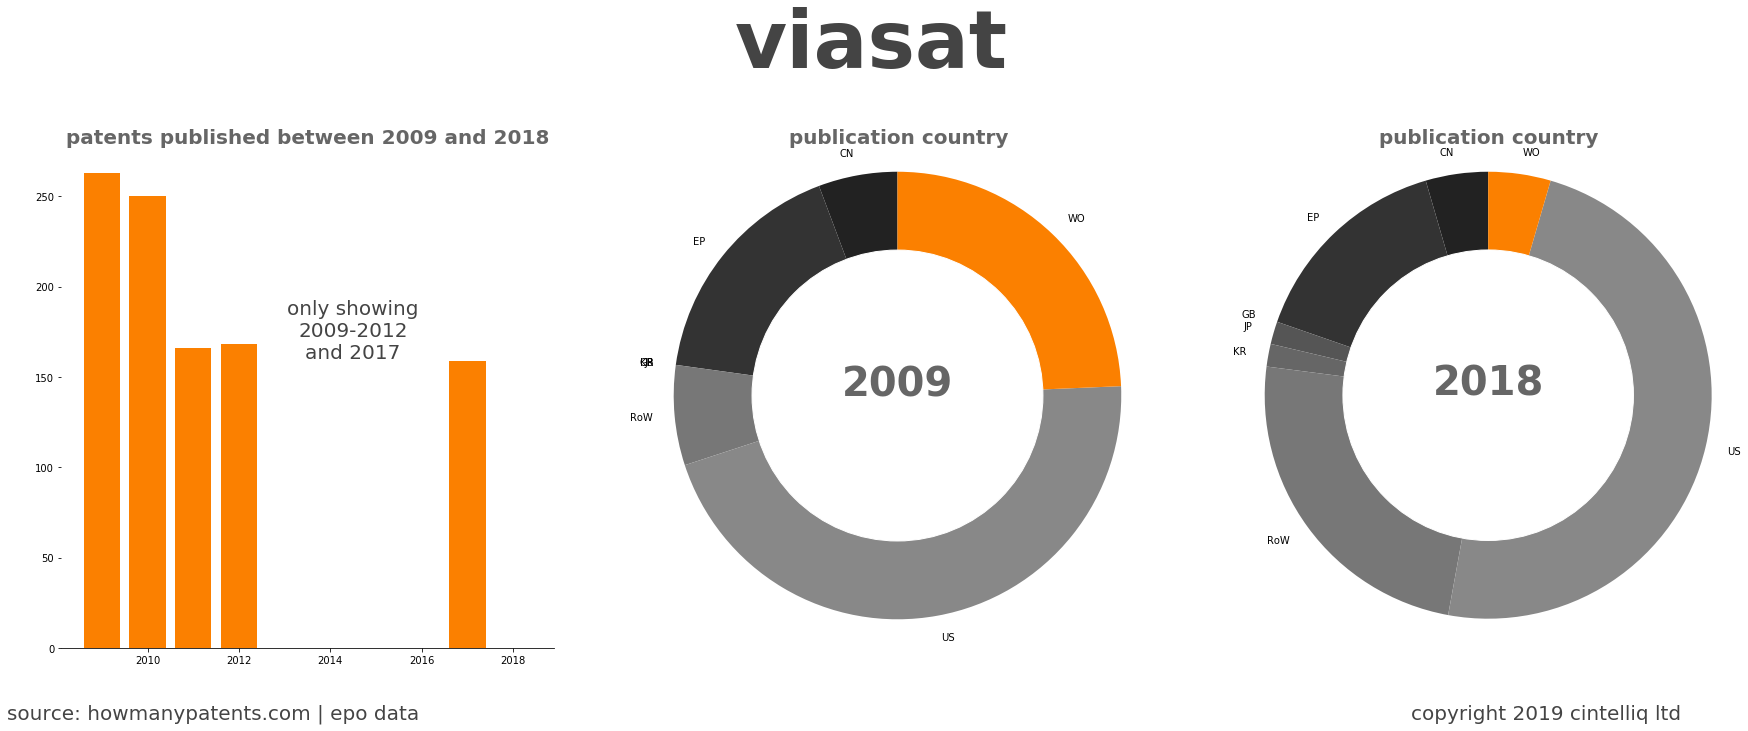 summary of patents for Viasat